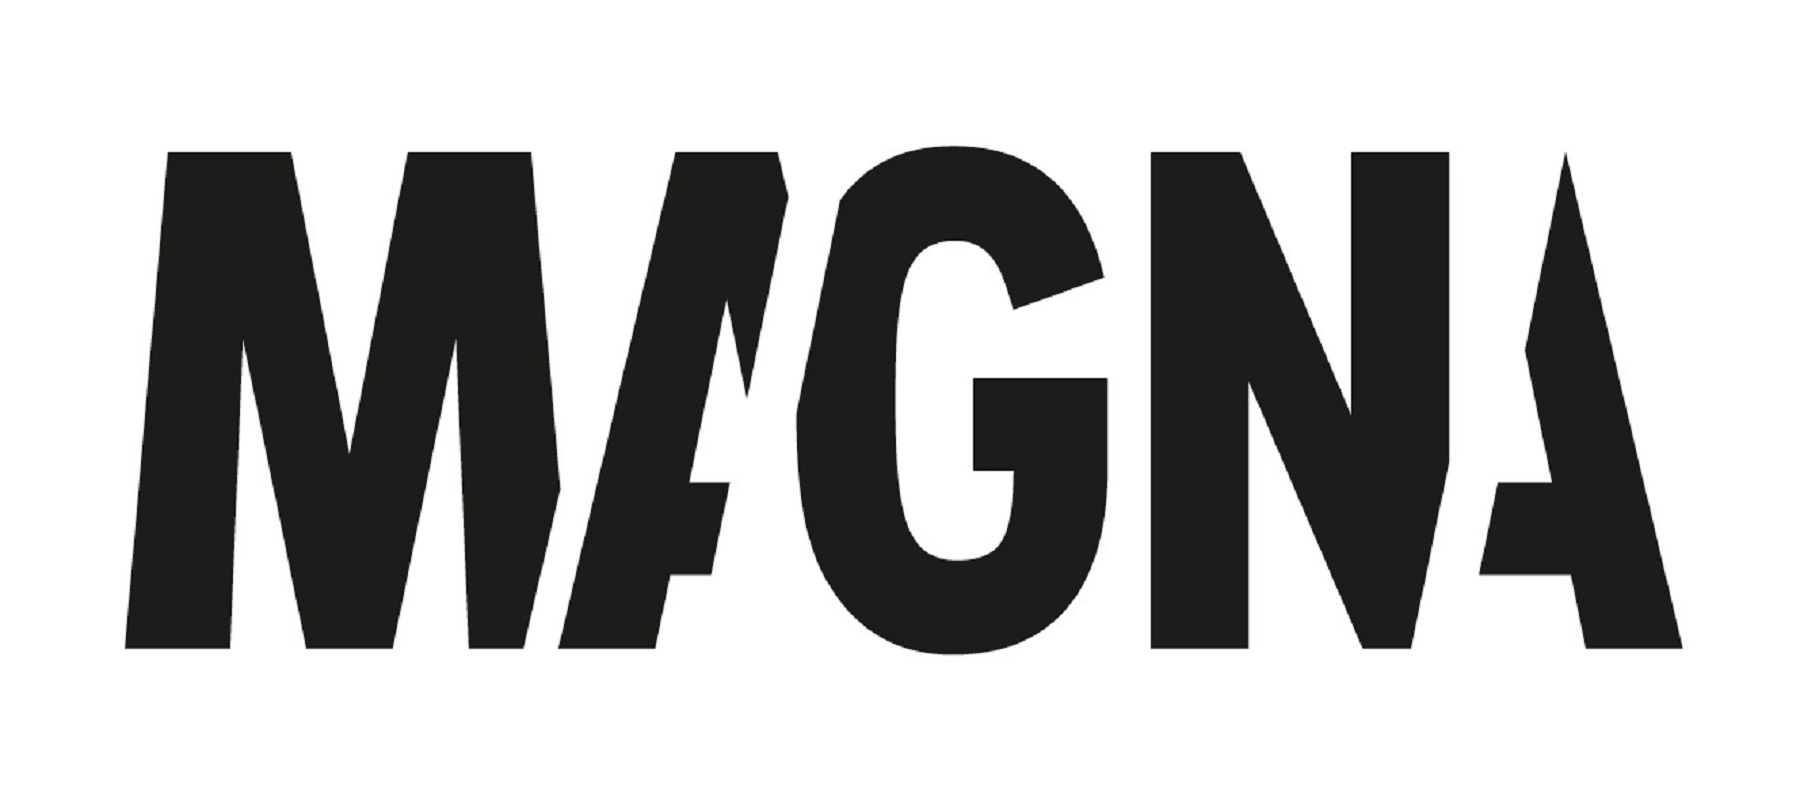 IPG MediaBrands’ MAGNA partners with OpenAP to boost data-driven video capabilities